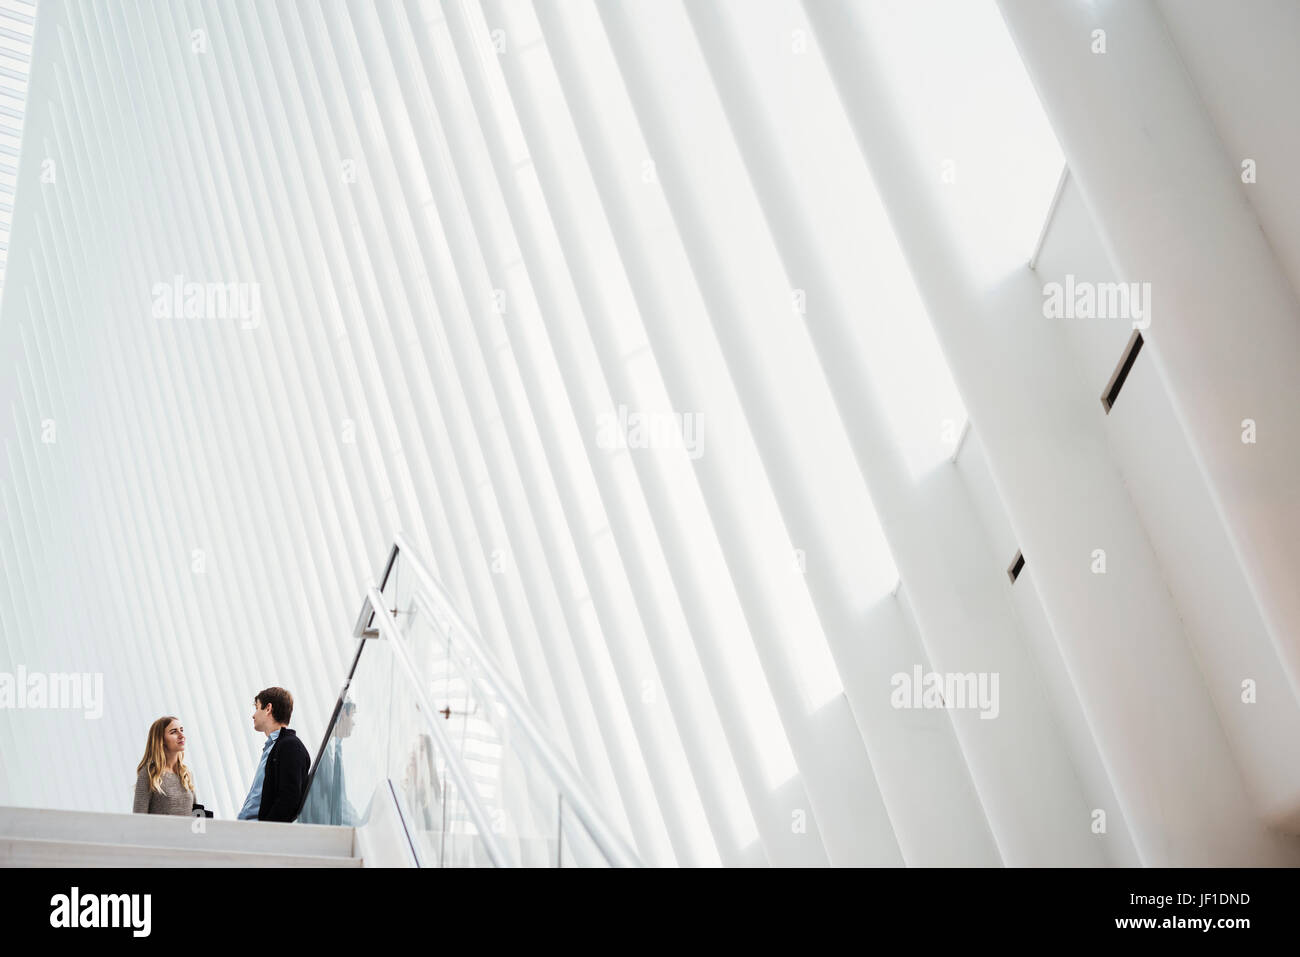 Two people at the top of steps in the central atrium of the Oculus building, talking. Stock Photo